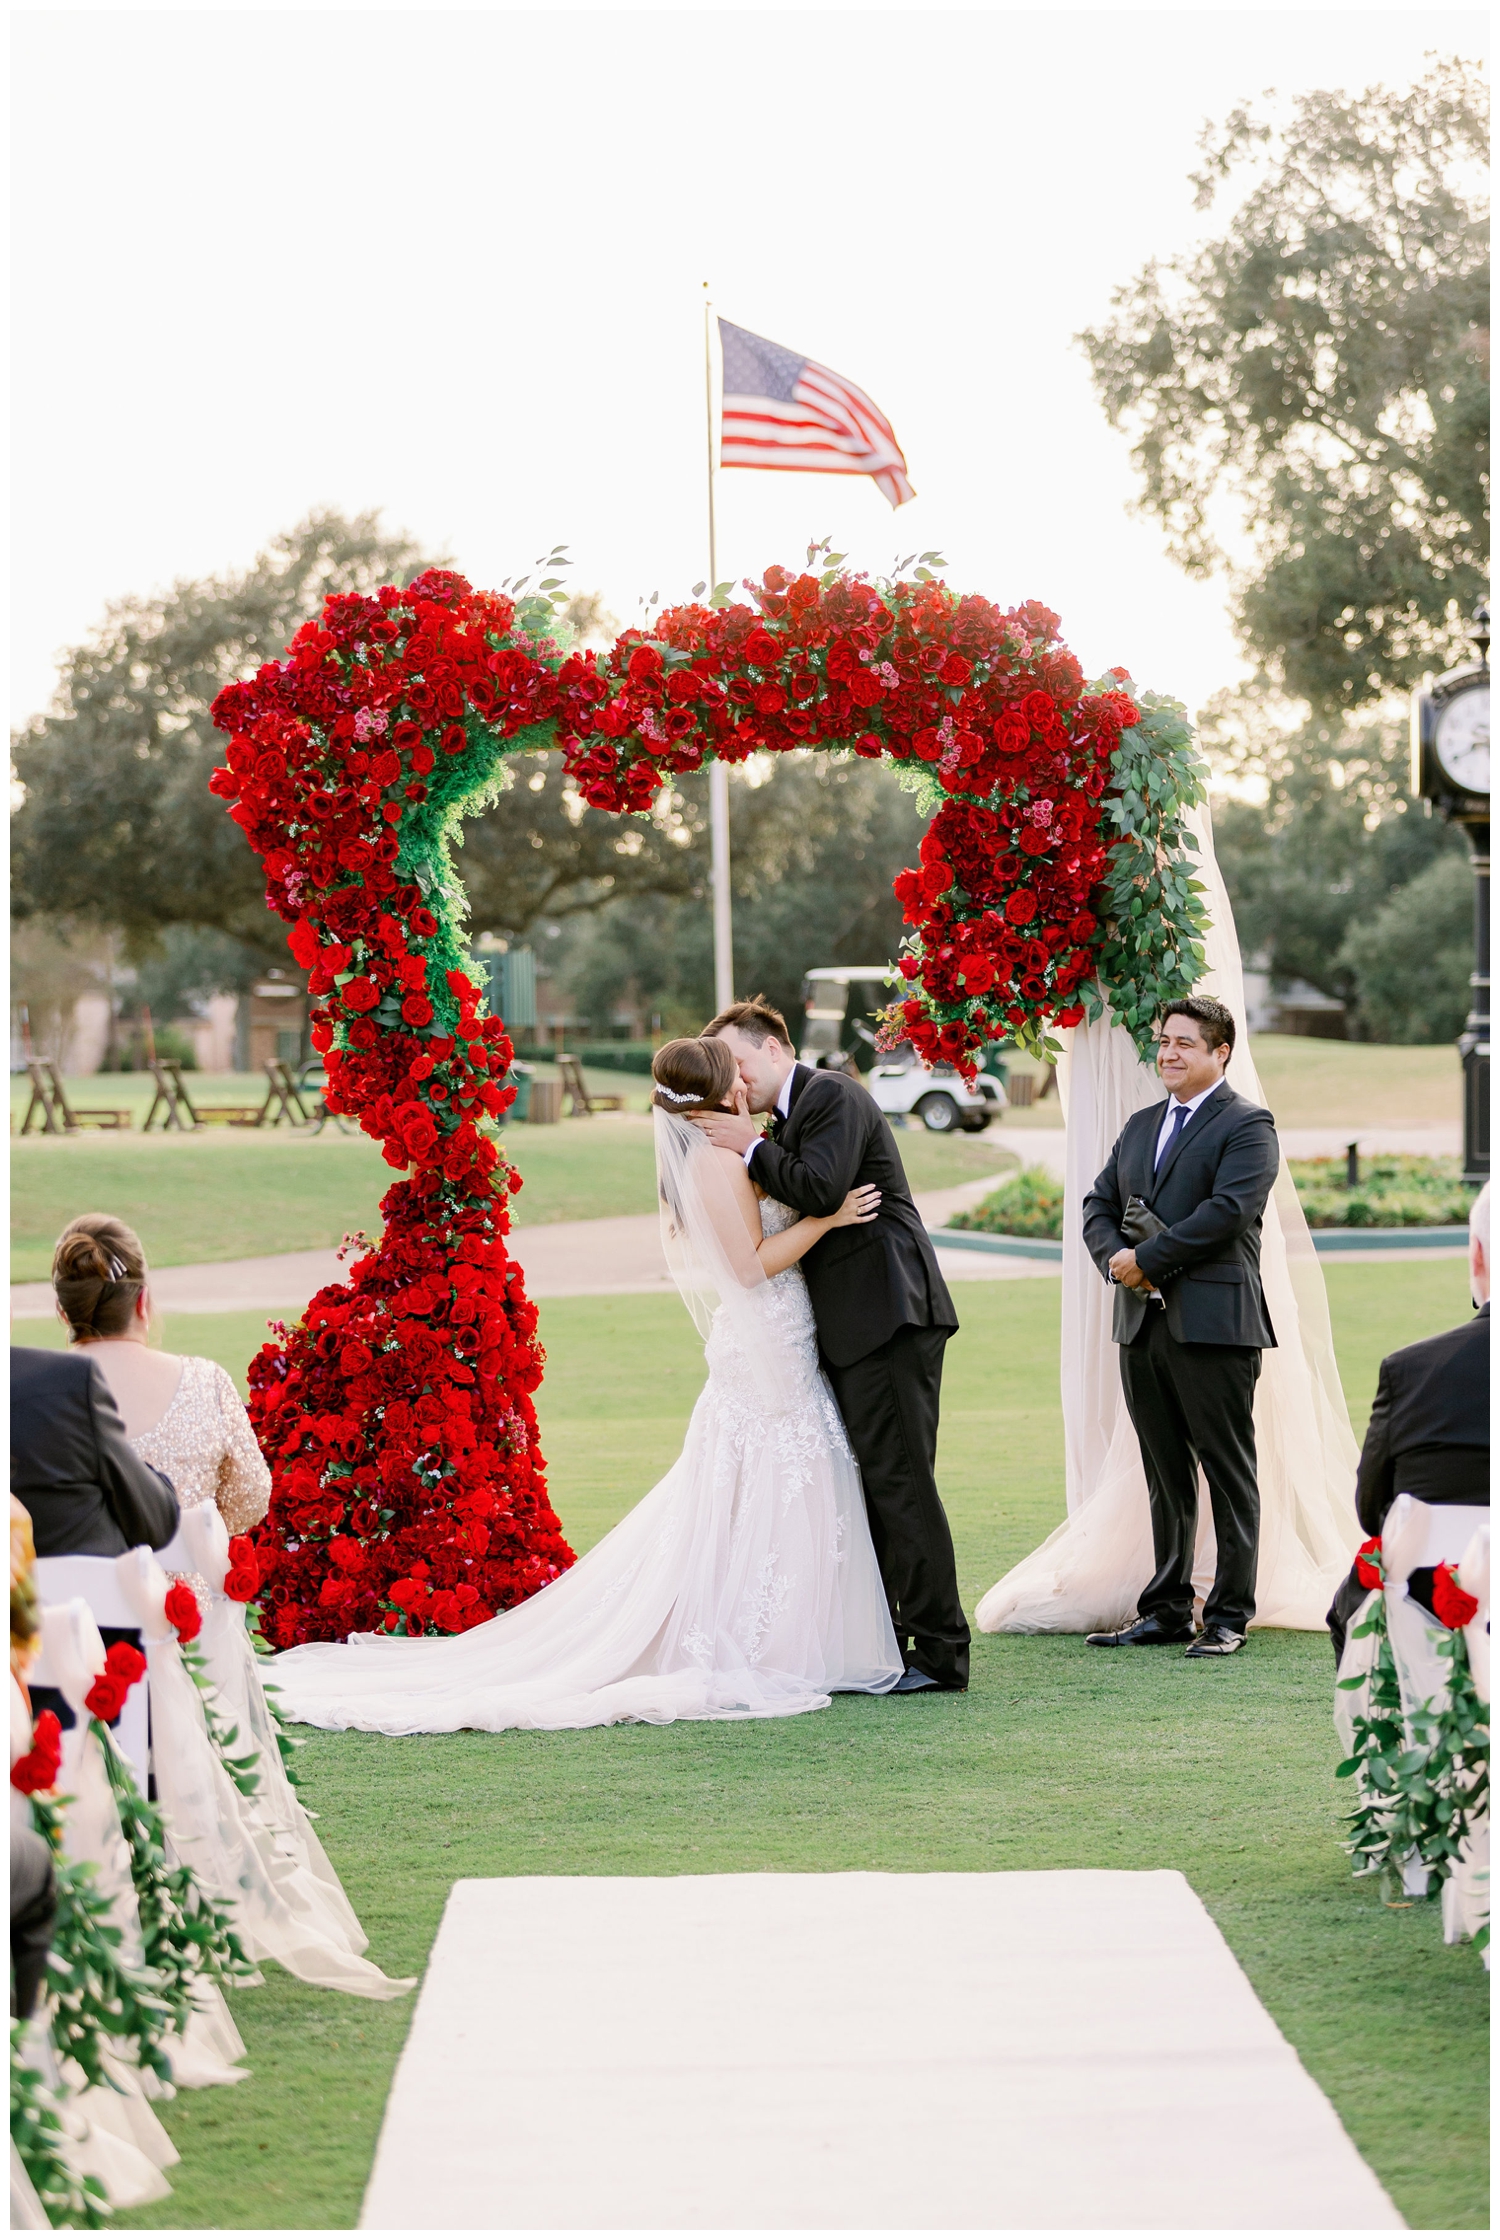 bride and groom ceremony kiss in front of red floral arch Sugar Creek Country Club wedding